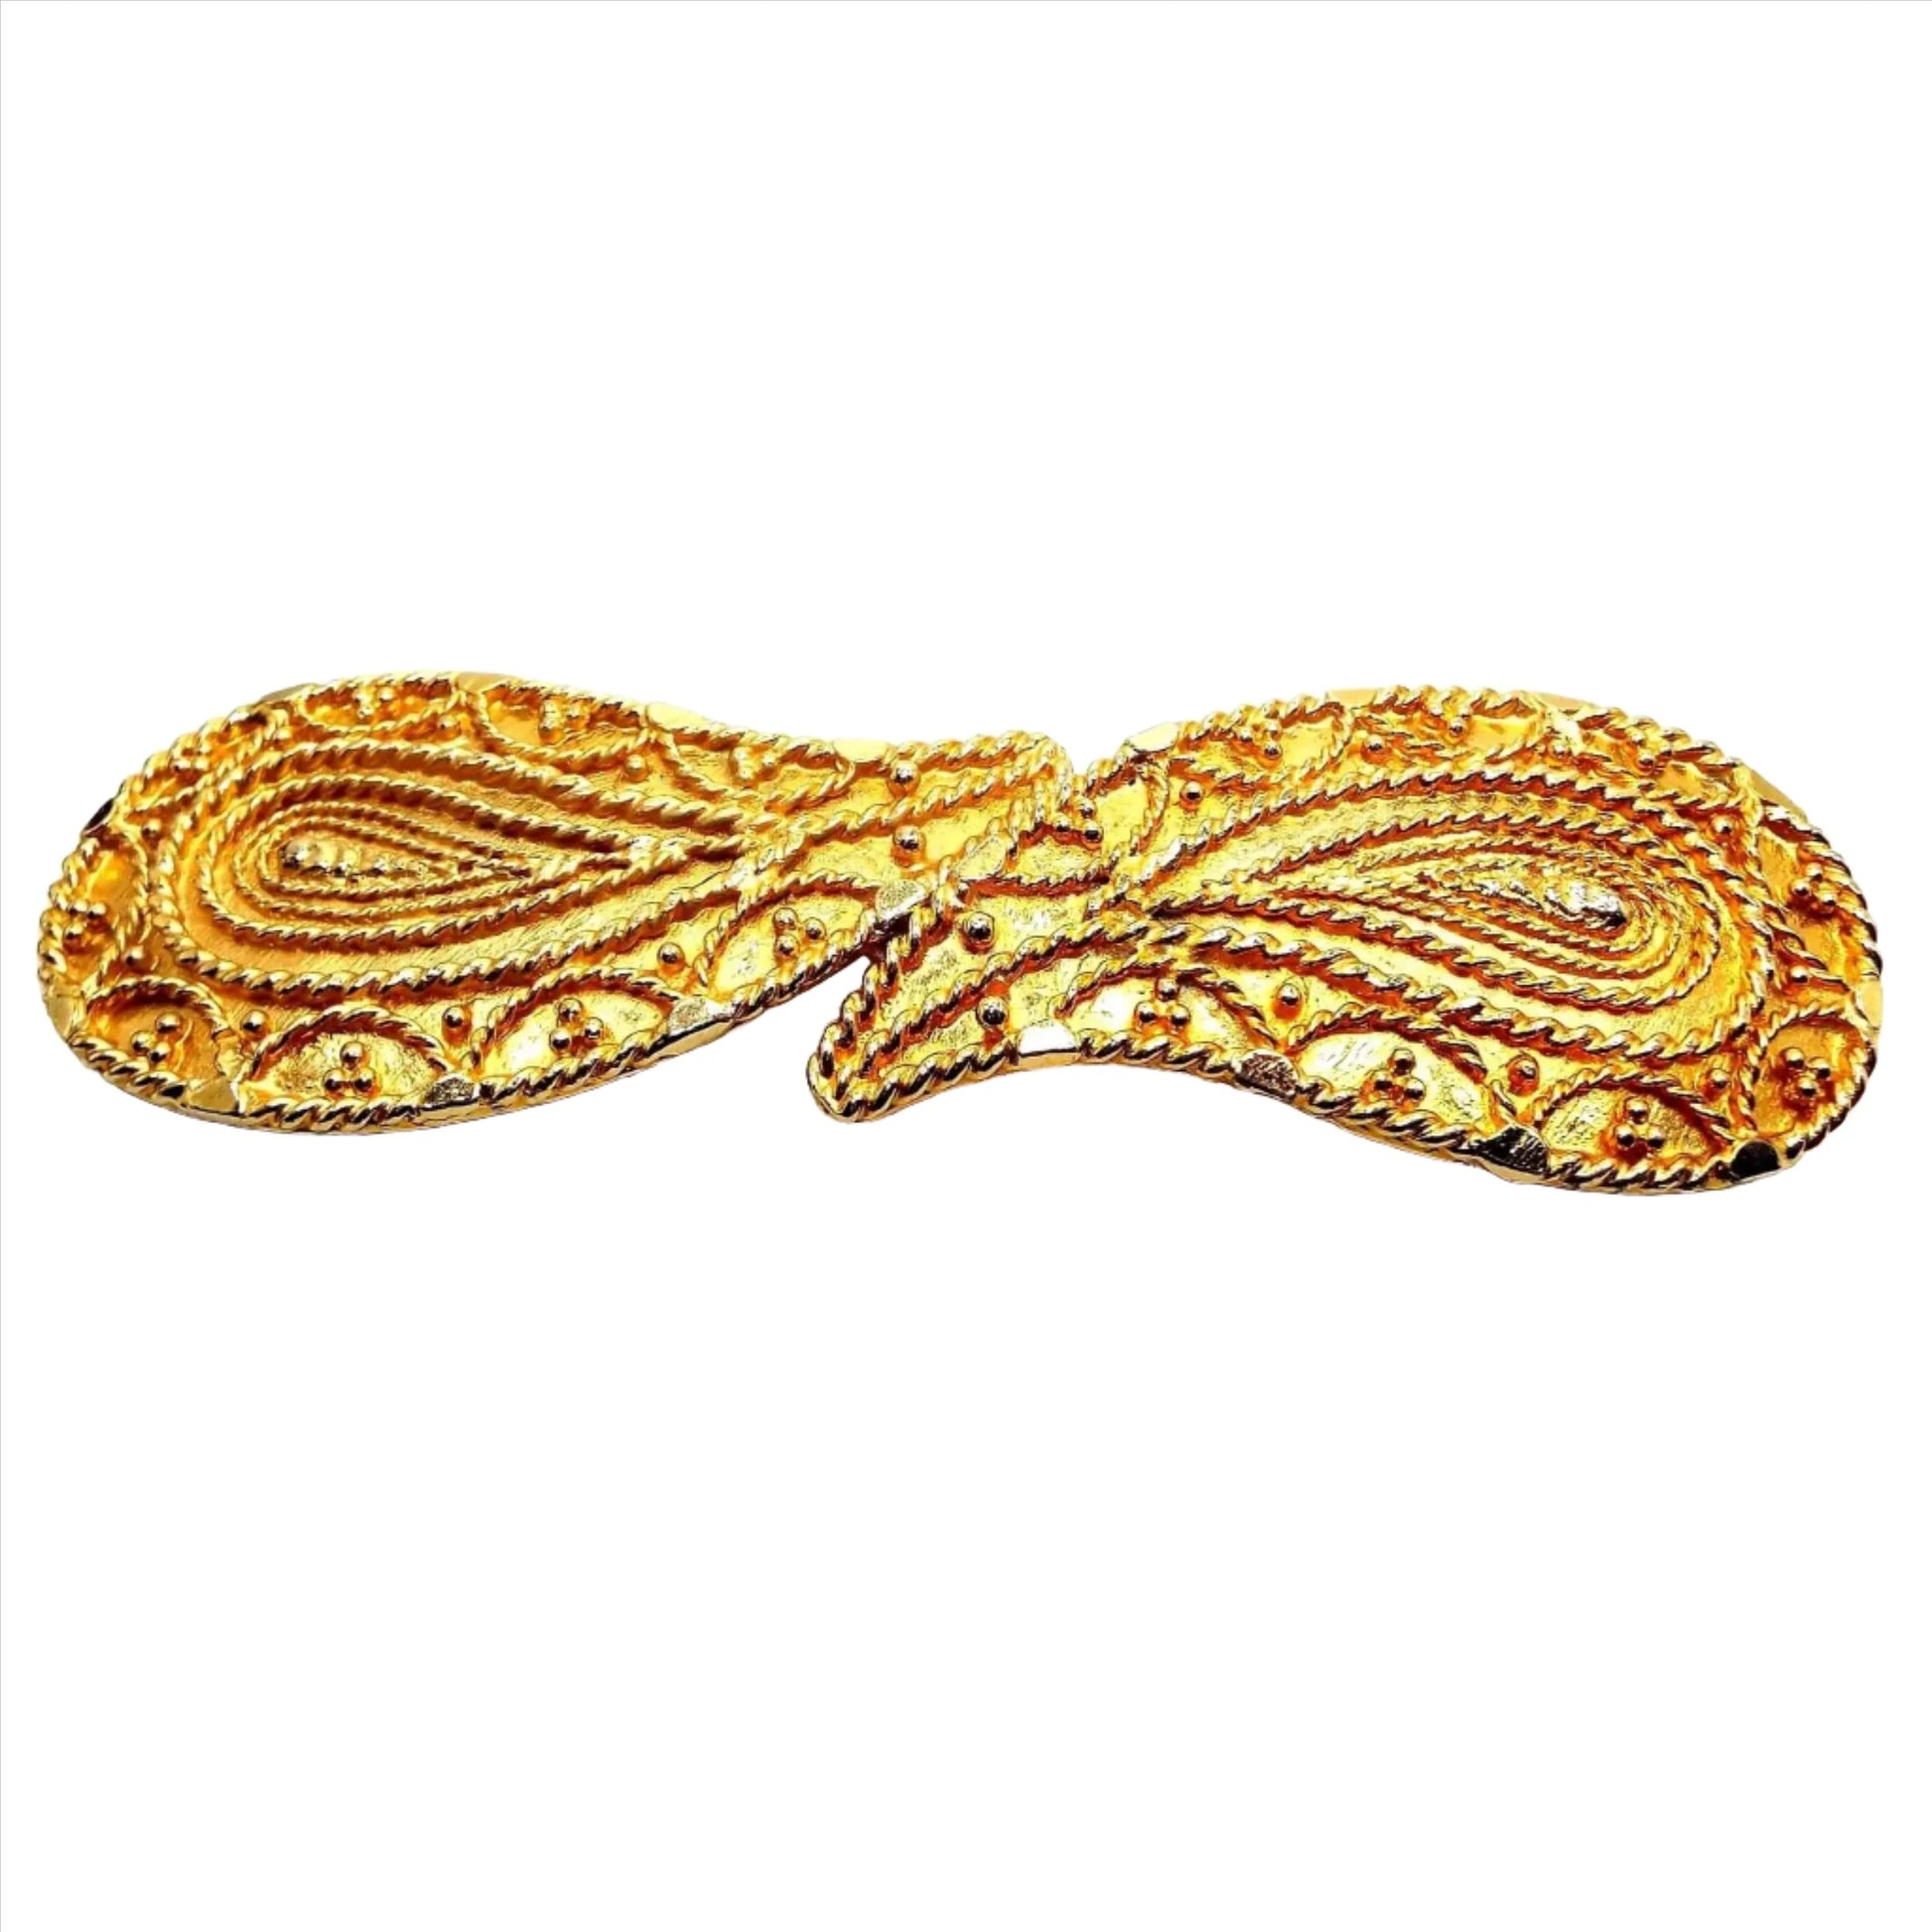 Angled front view of the retro vintage two piece belt buckle. It is gold tone in color and each piece has a detailed paisley design. They look like two teardrops with the pointed ends coming together in the middle.